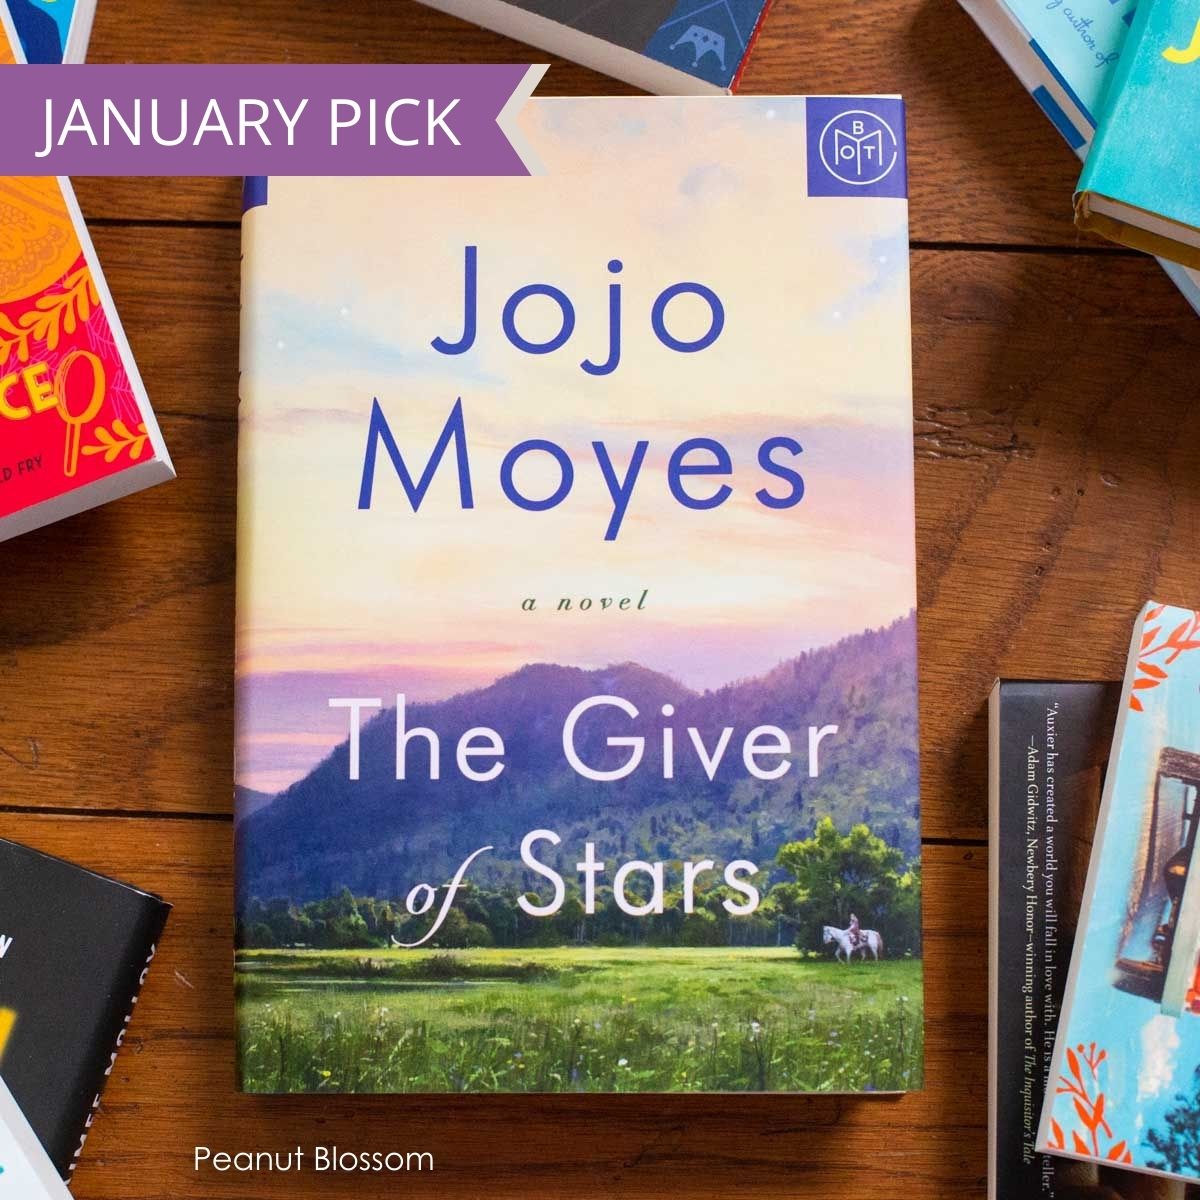 A copy of the book The Giver of Stars by Jojo Moyes sits on a table.